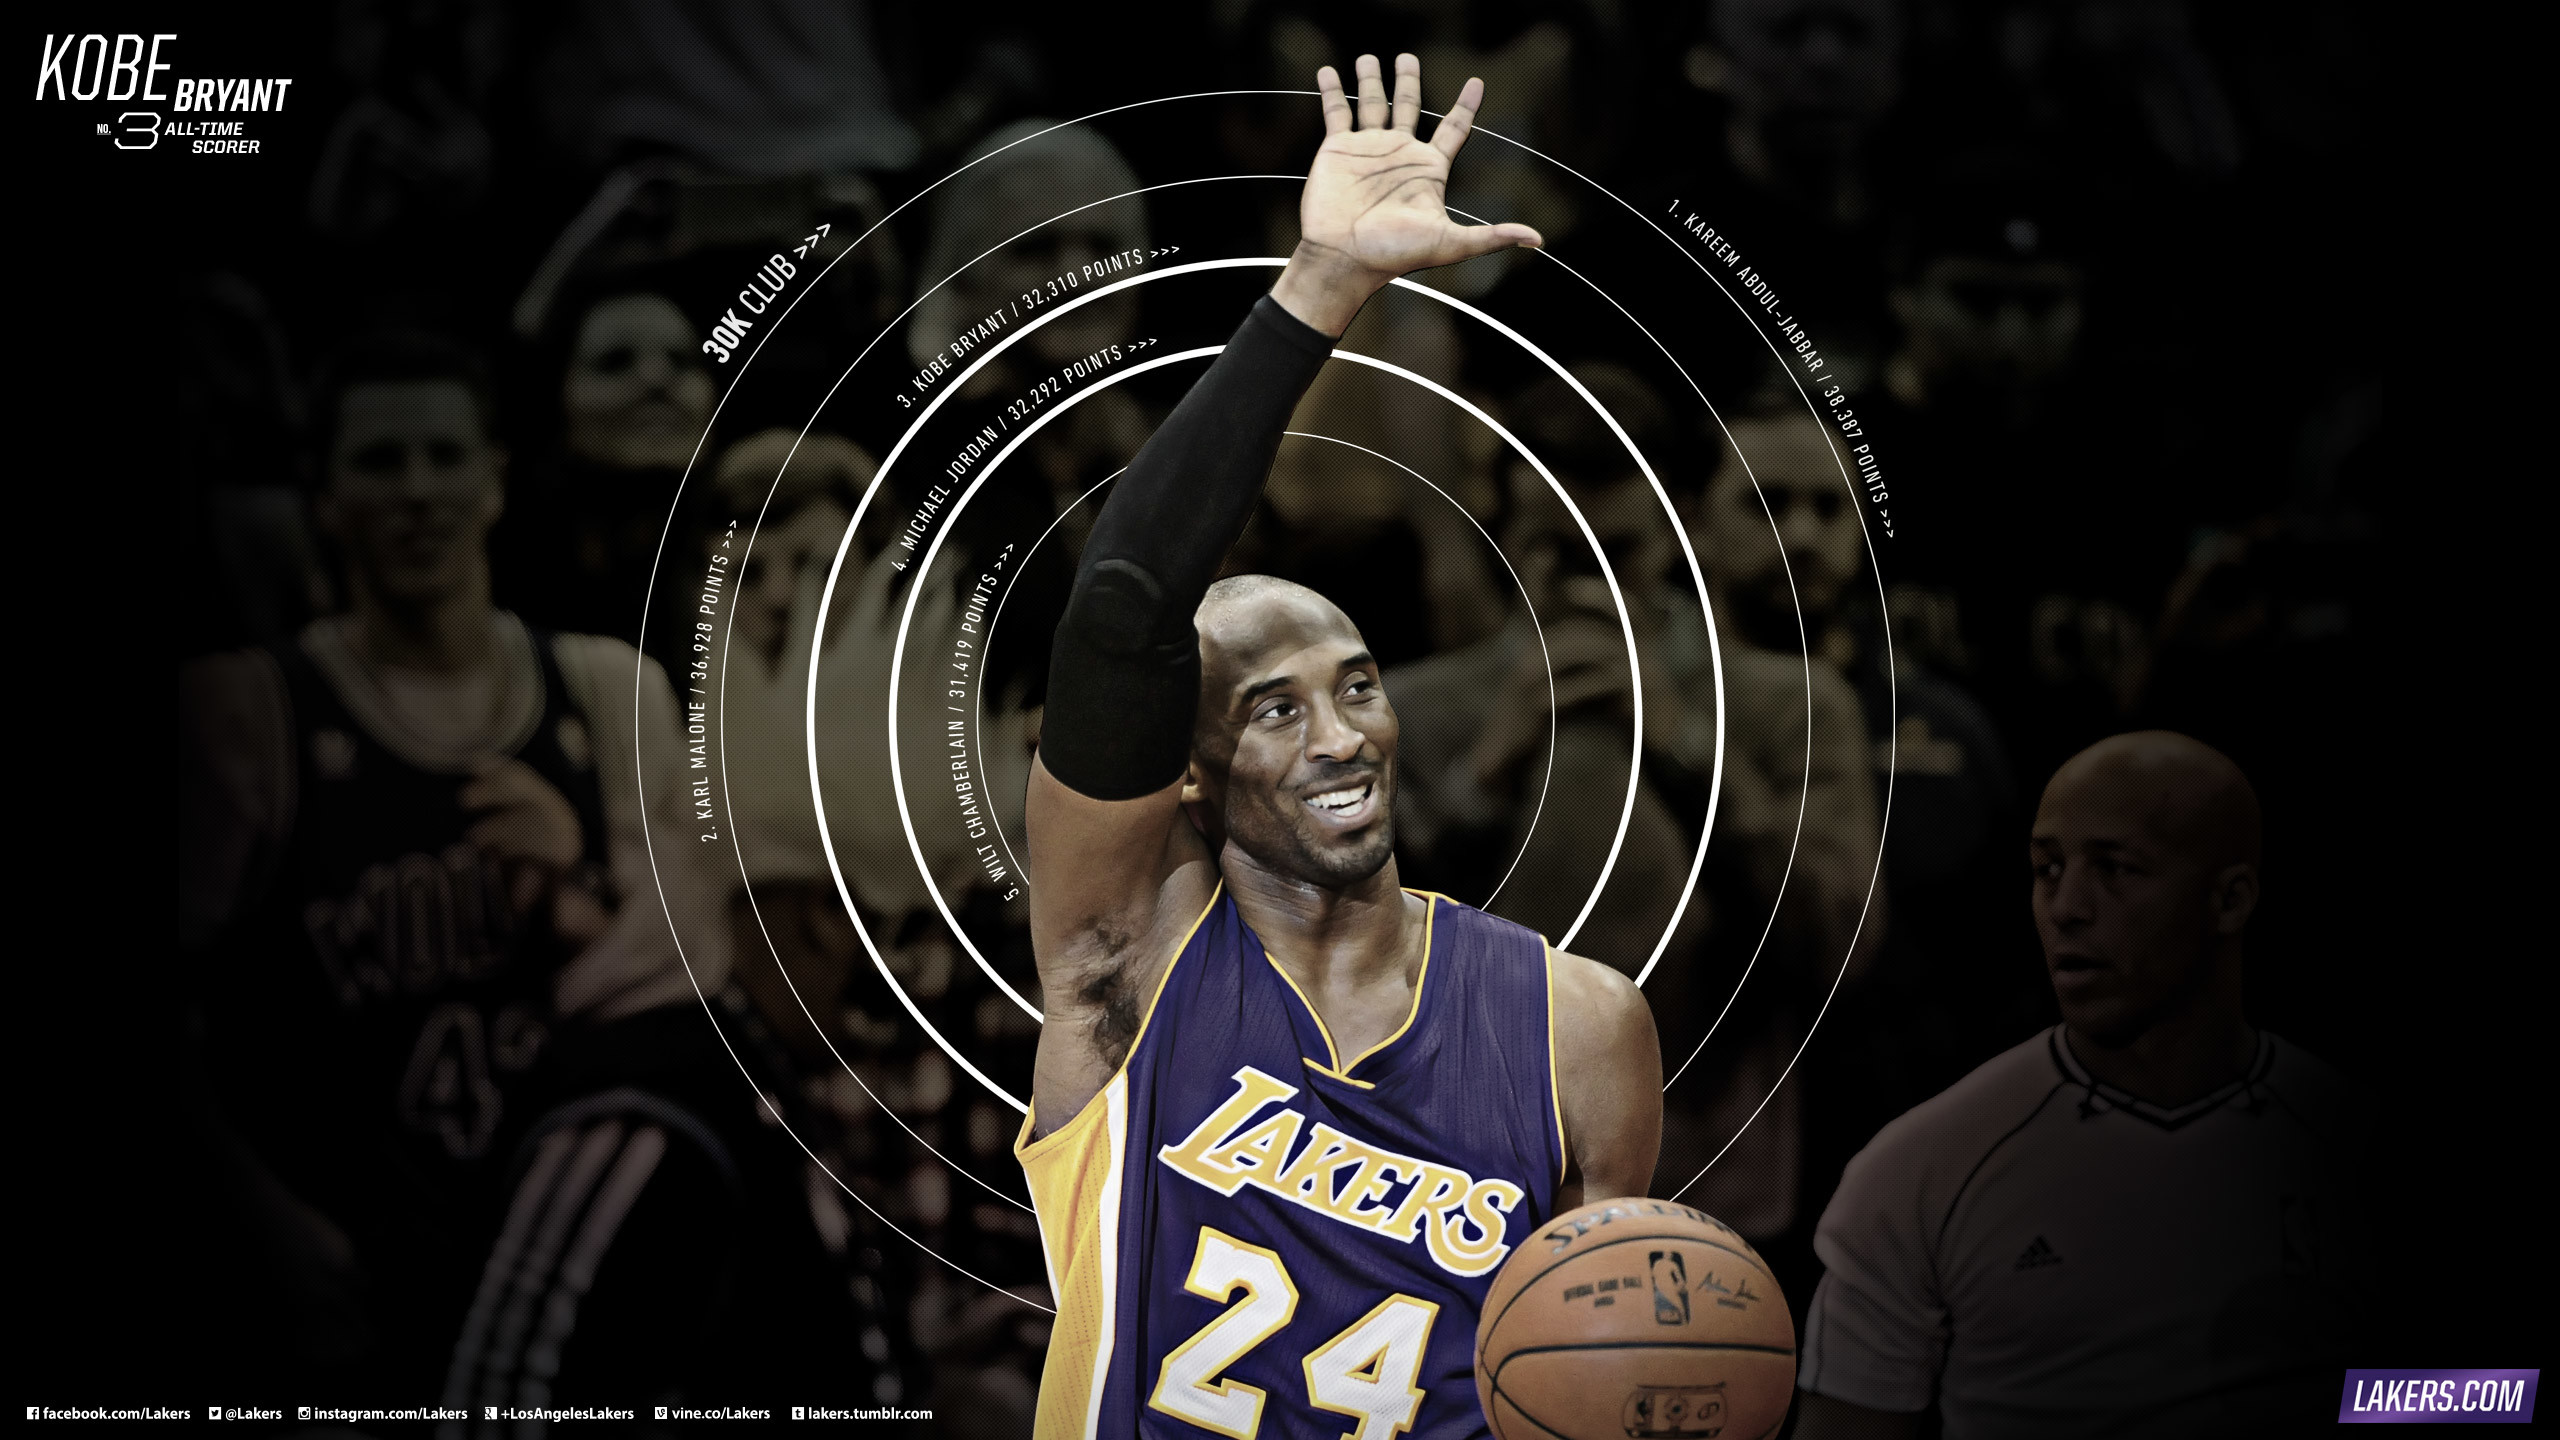 Kobe Bryant 2014 Dunk Hd Images 3 HD Wallpapers